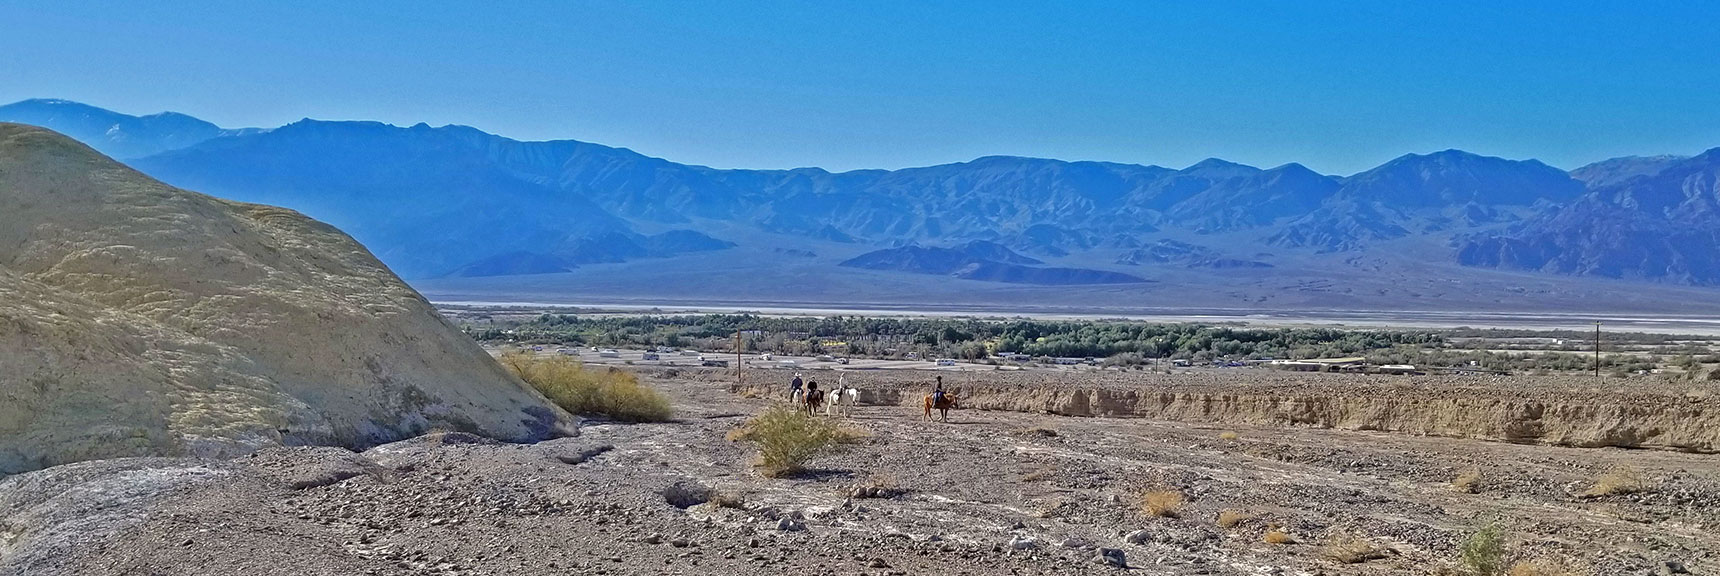 Group Approaching on Horseback. Furnace Creek Ranch with Panamint Range Background. | Tea House & Table Rock Circuit | Furnace Creek | Death Valley National Park, California